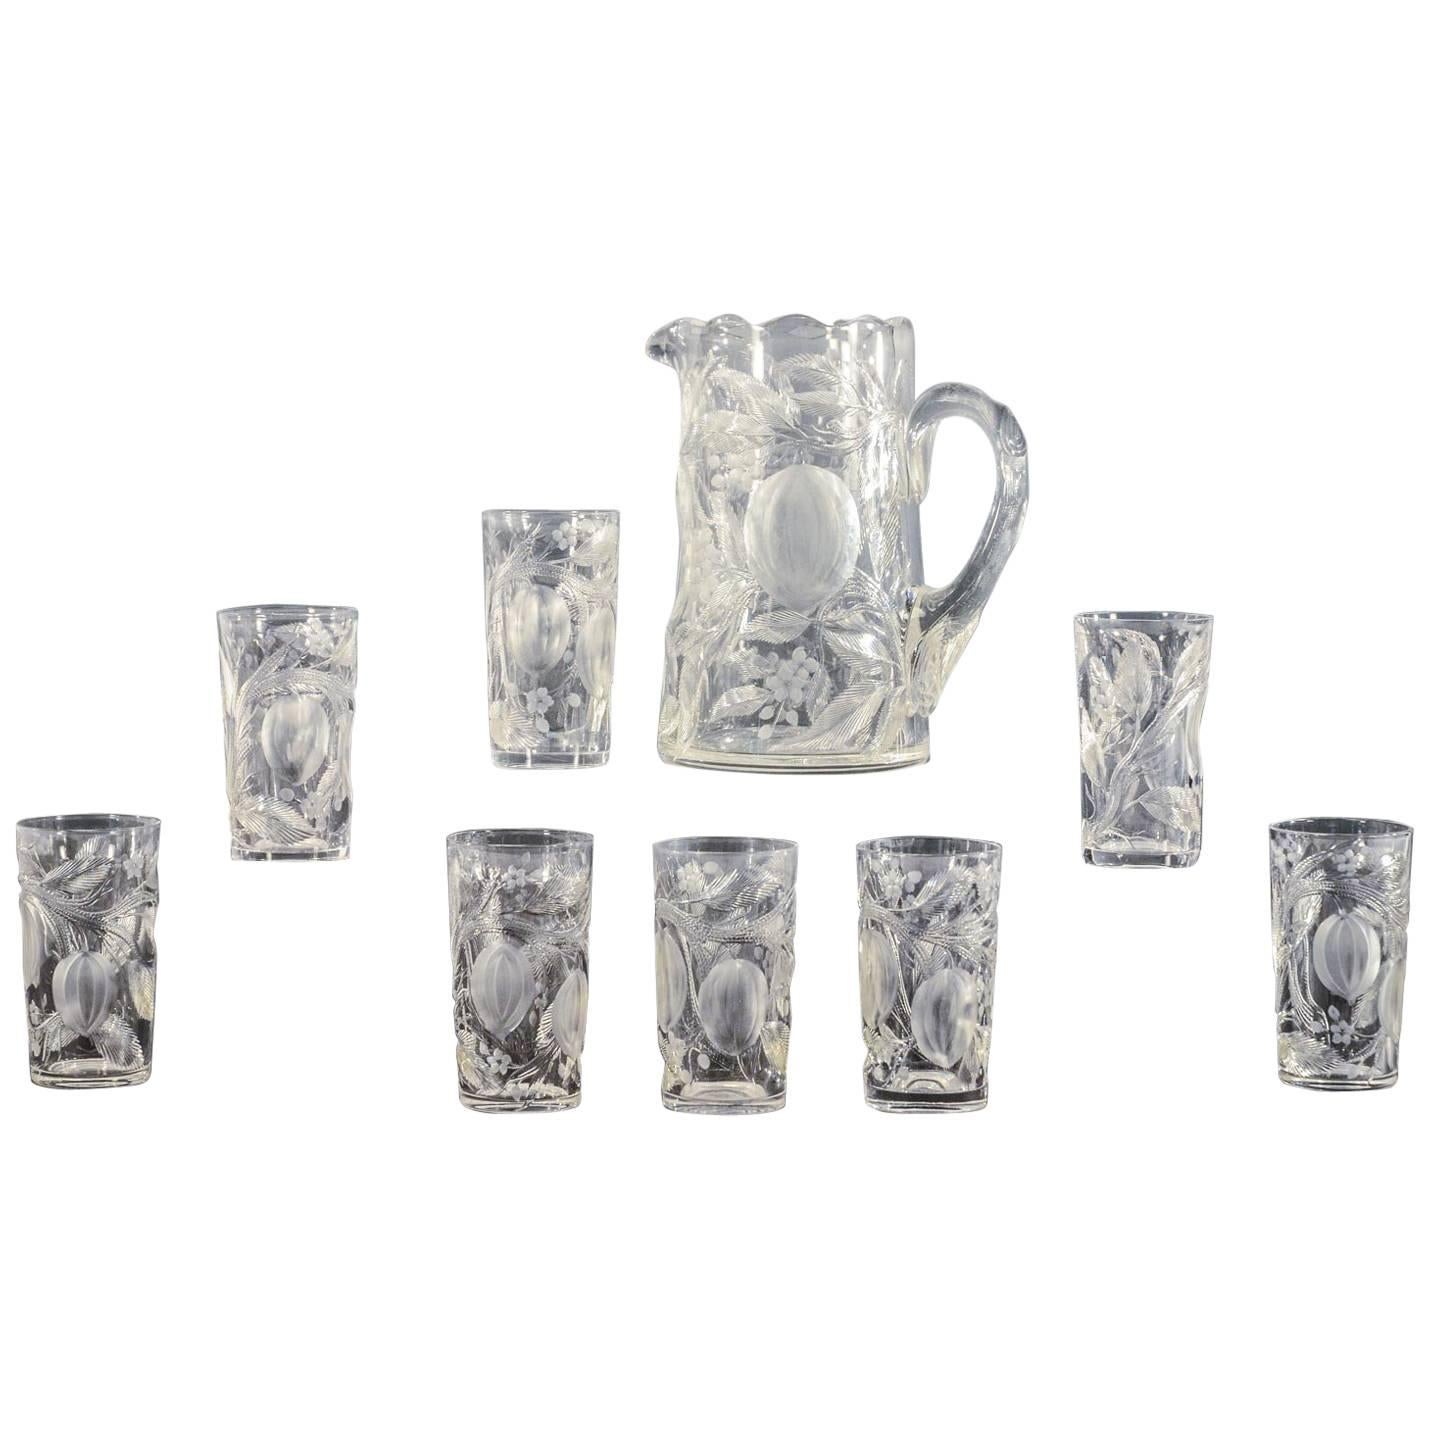  Set of Eight Hawkes Gravic Hand Blown Crystal Tumblers and Matching Pitcher